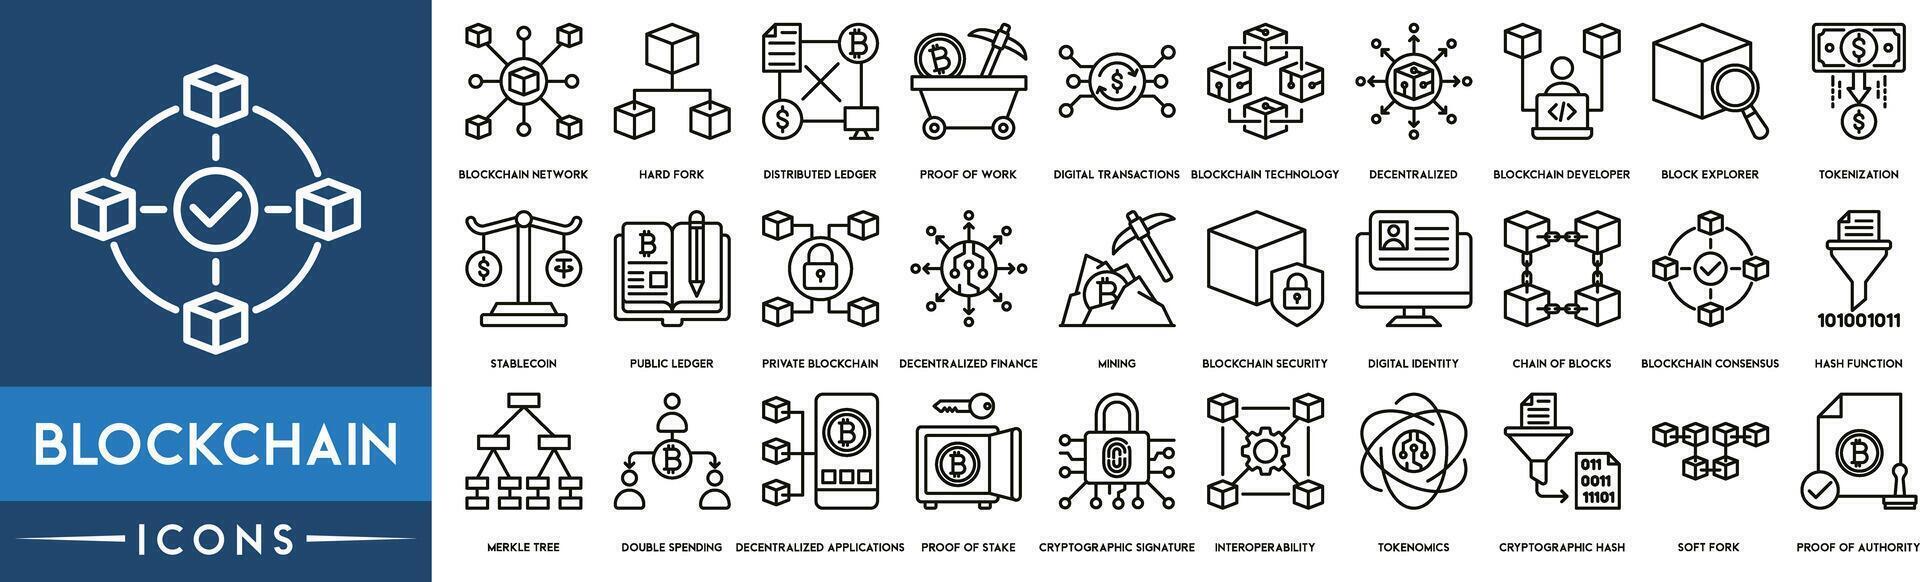 Blockchain Outline Icon Collection. Blockchain Network, Cryptocurrency, Distributed Ledger, Digital Transactions, Technology, Tokenization, stable coin, Private Blockchain, Mining and Security. vector